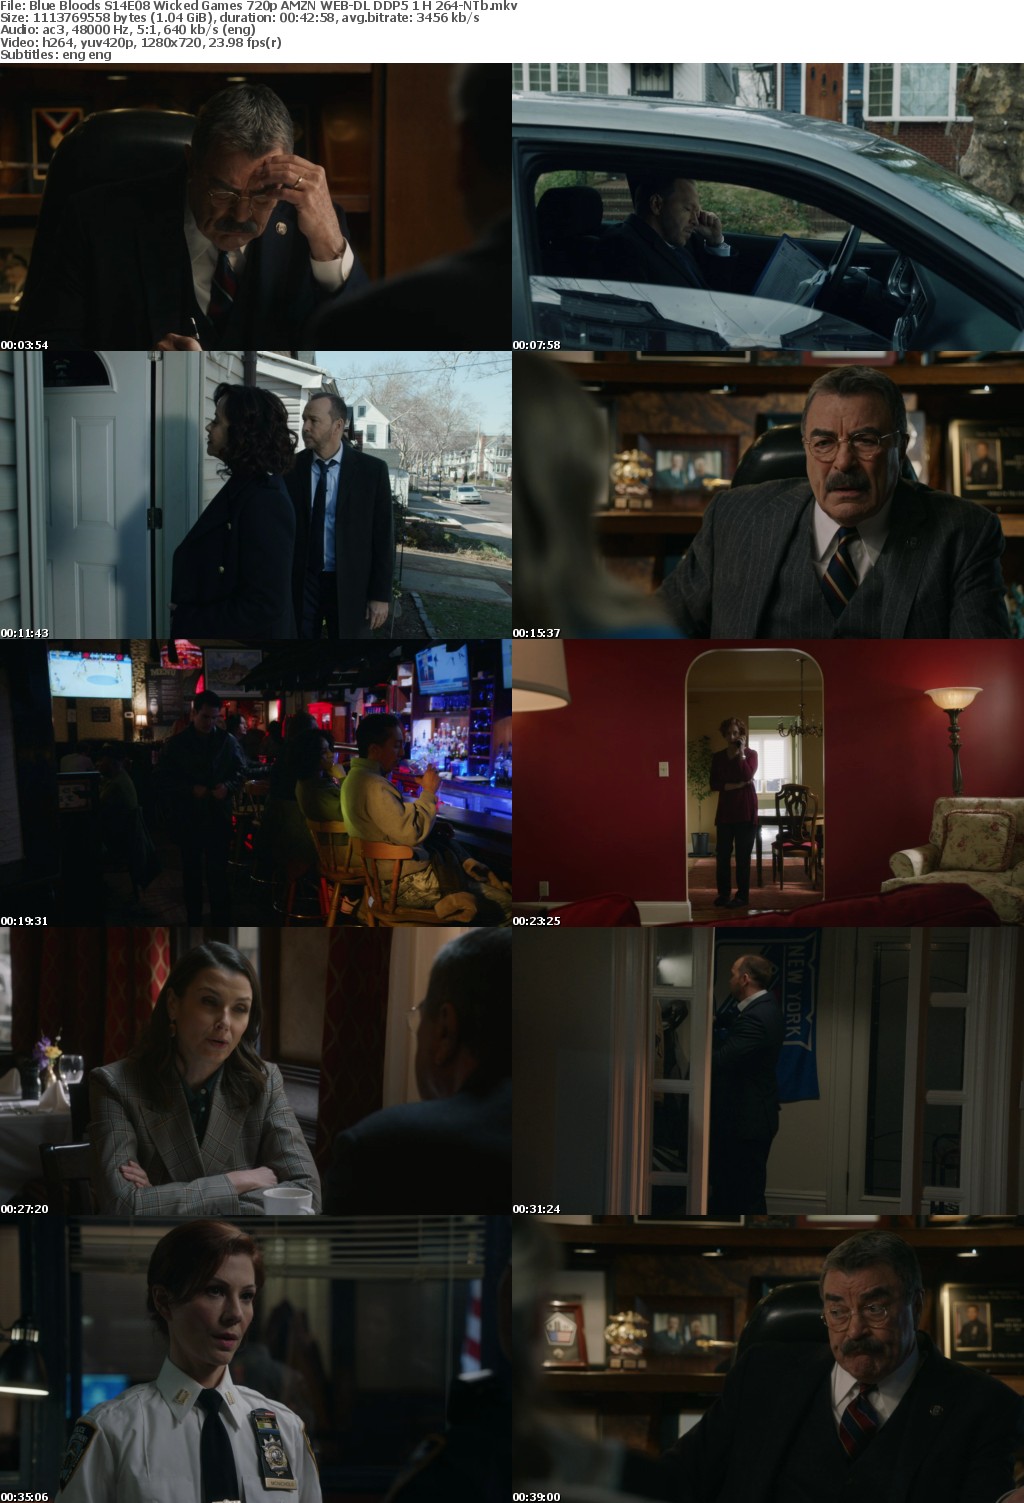 Blue Bloods S14E08 Wicked Games 720p AMZN WEB-DL DDP5 1 H 264-NTb